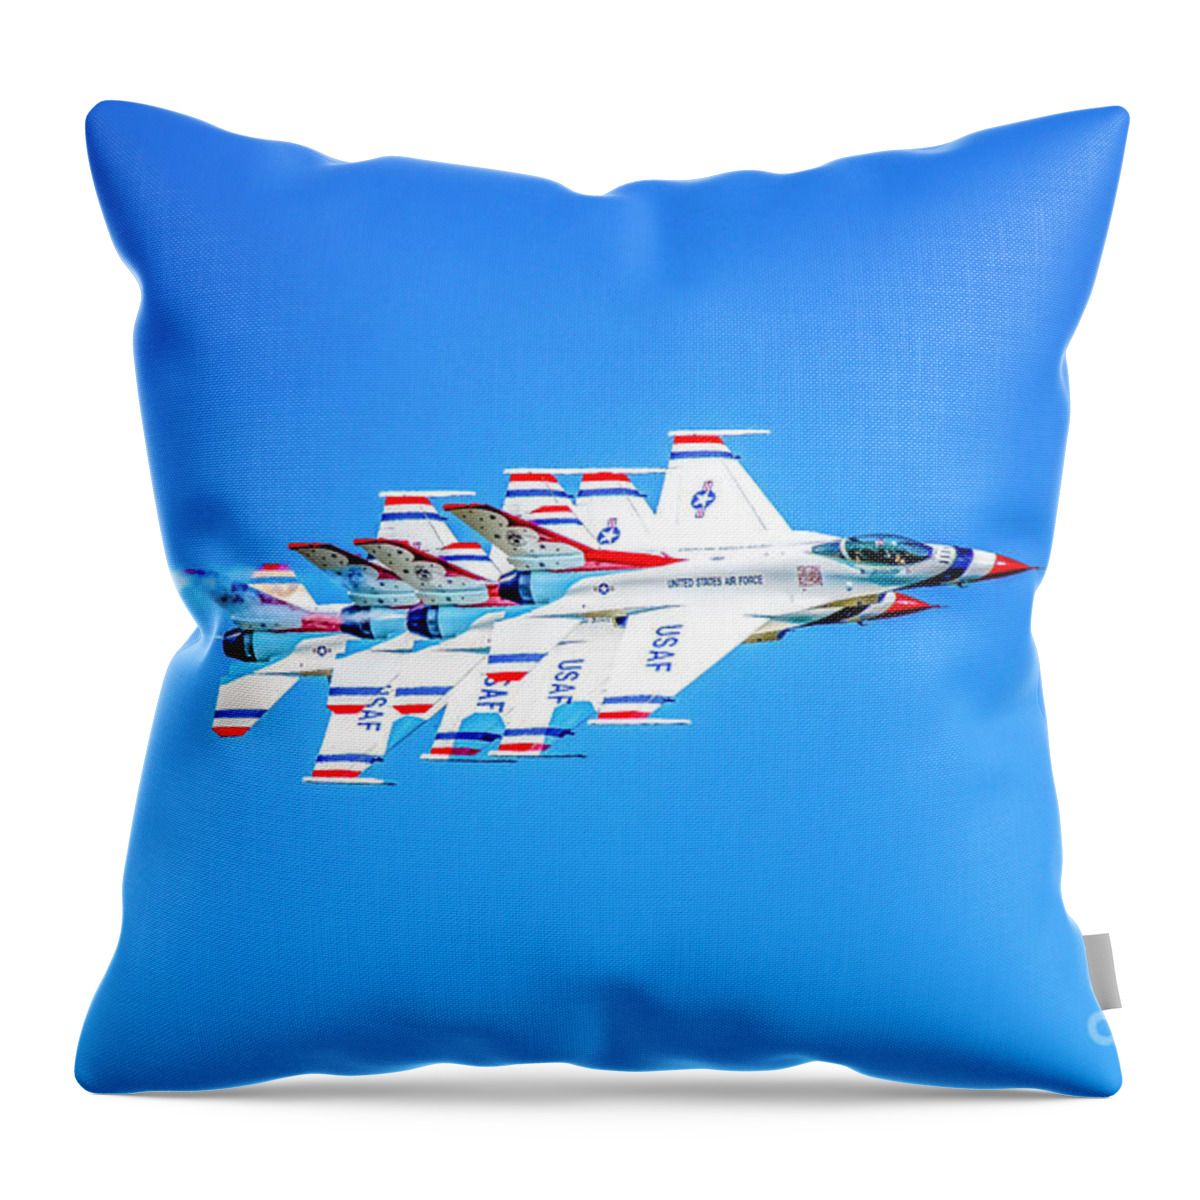 Thunderbirds Throw Pillow featuring the photograph Thunderbirds Echelon Formation by Jeff at JSJ Photography